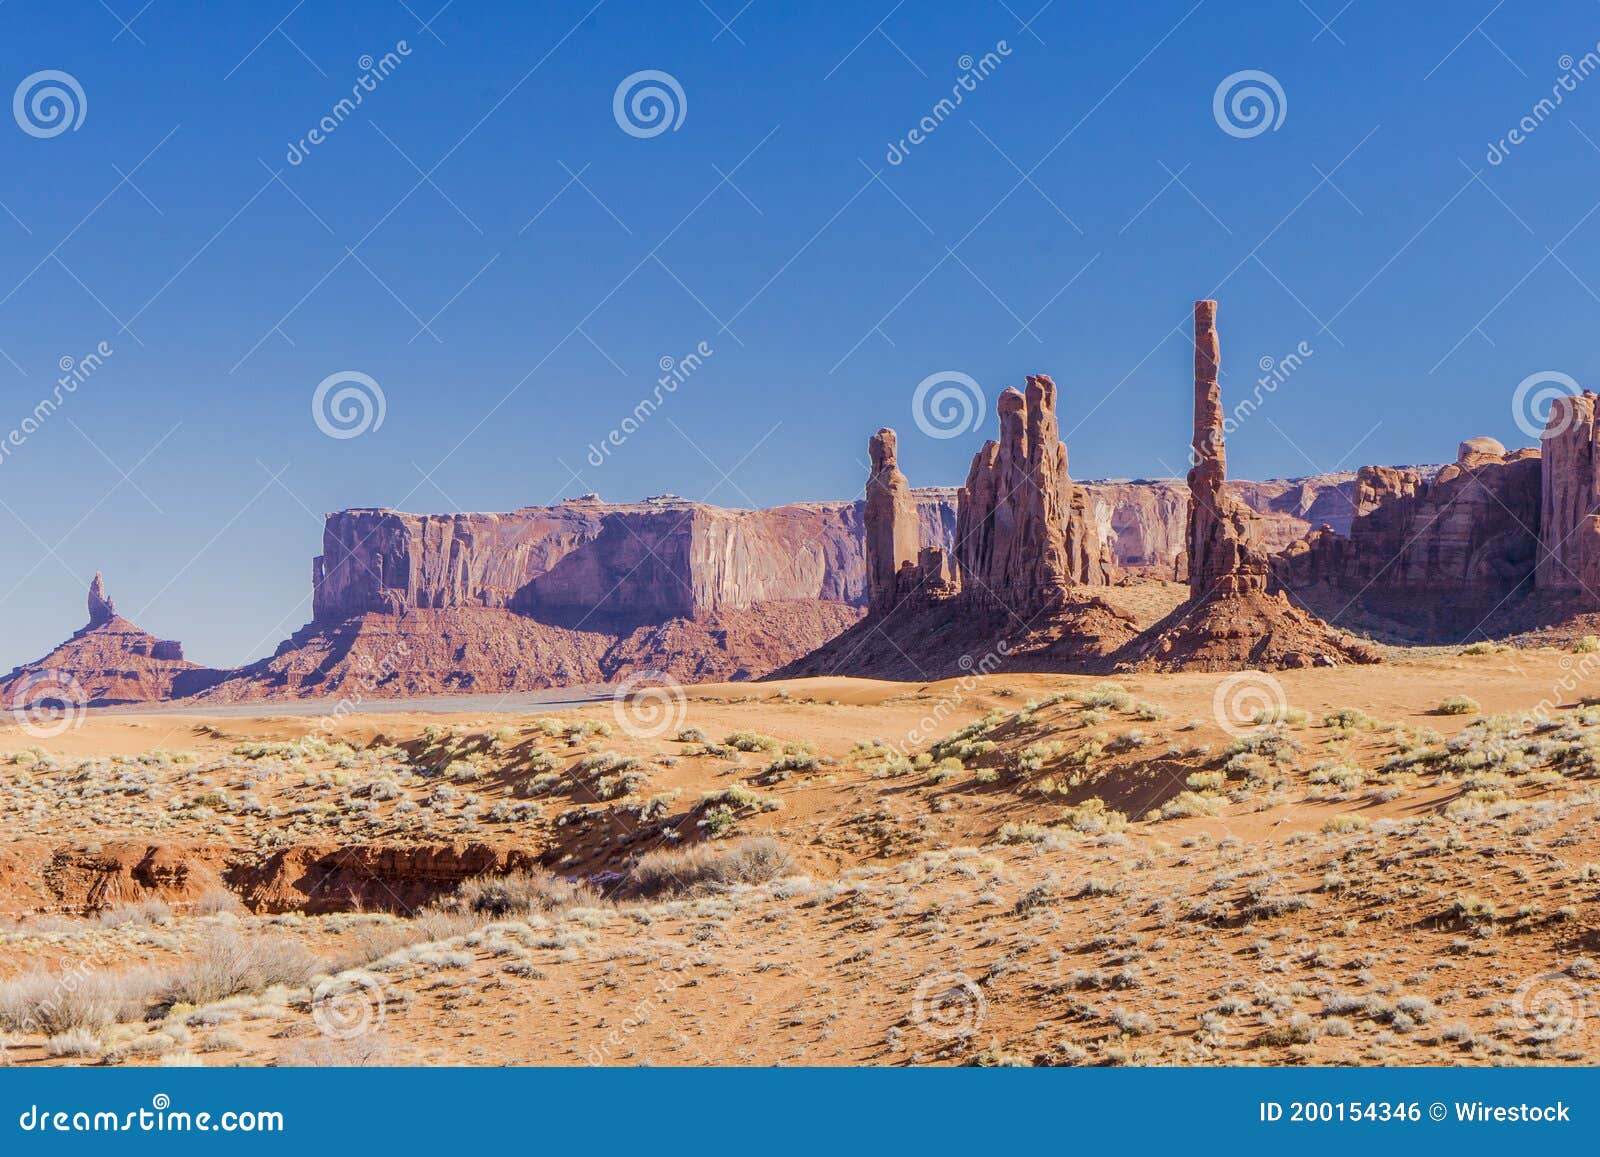 the totem pole and yel-bichel pillars in monument valley